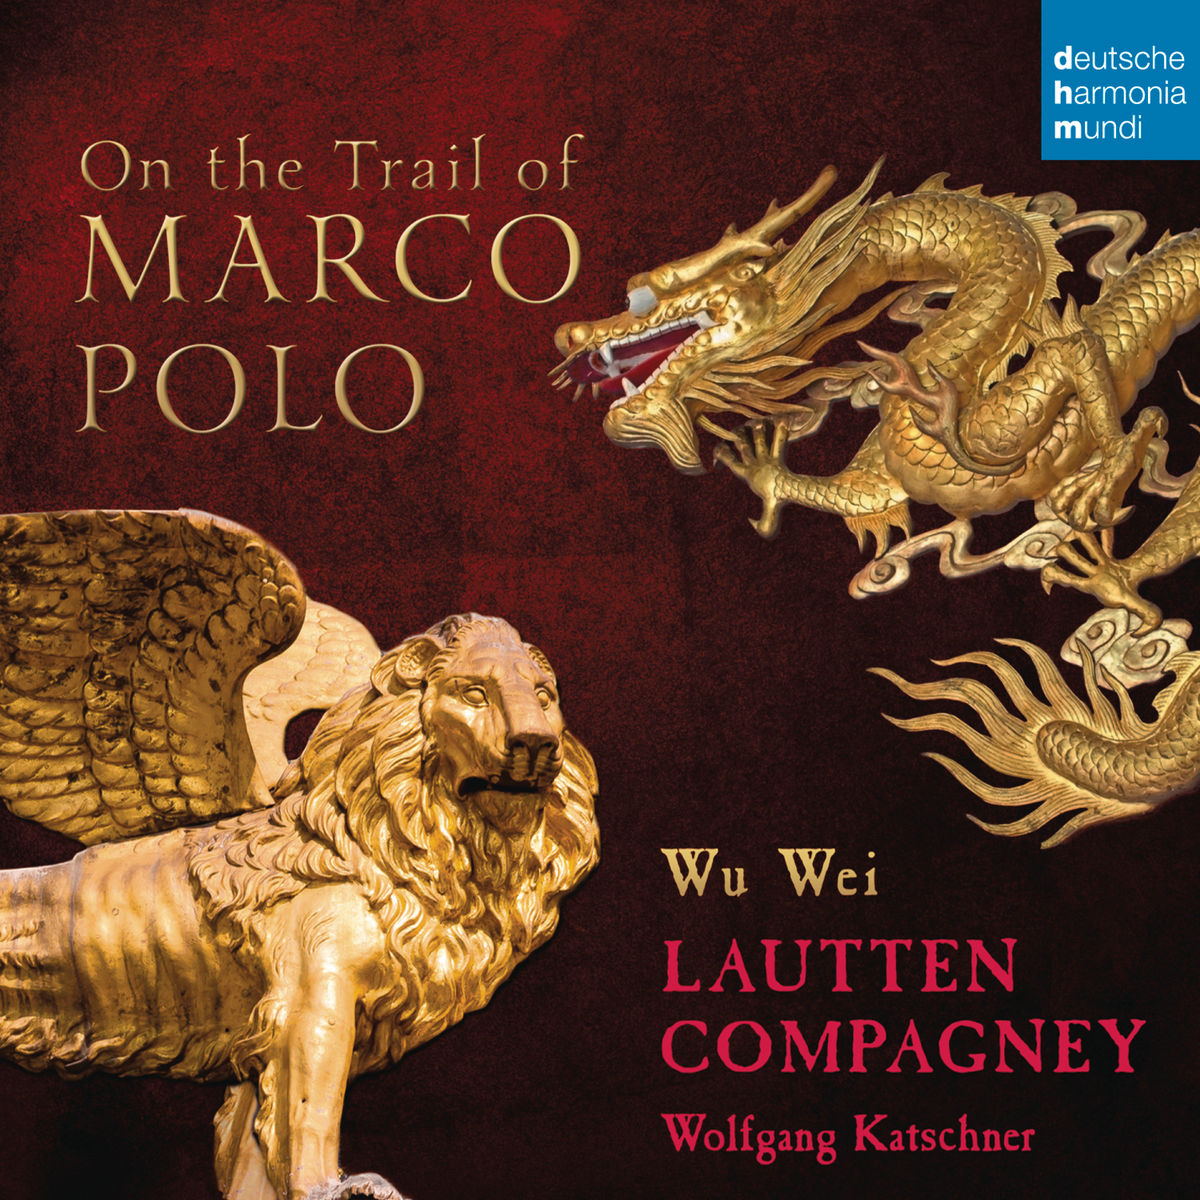 Lautten Compagney – On the Trail of Marco Polo (2015) [Qobuz FLAC 24bit/48kHz]